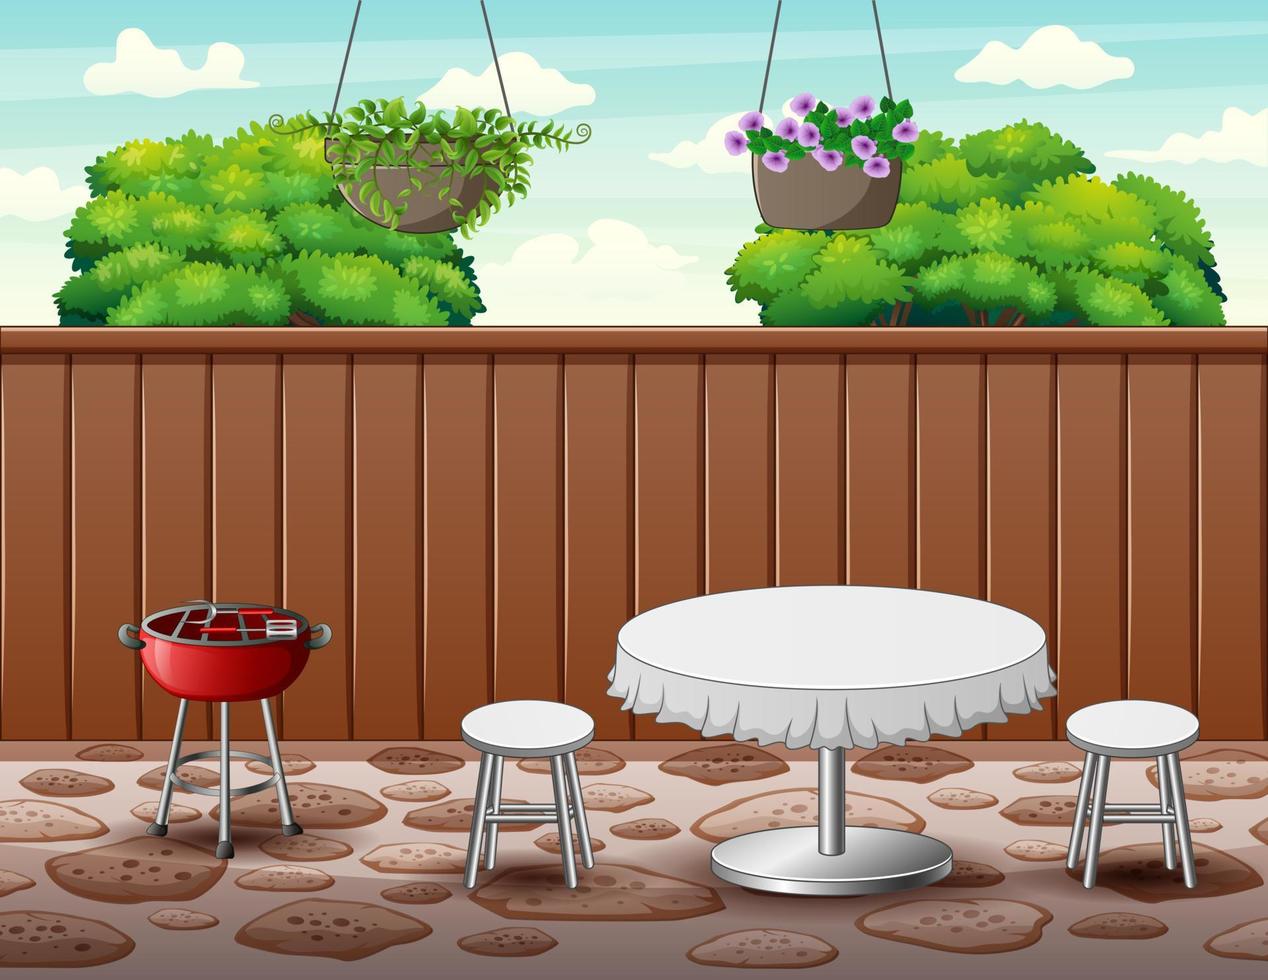 Barbecue party background in the backyard vector